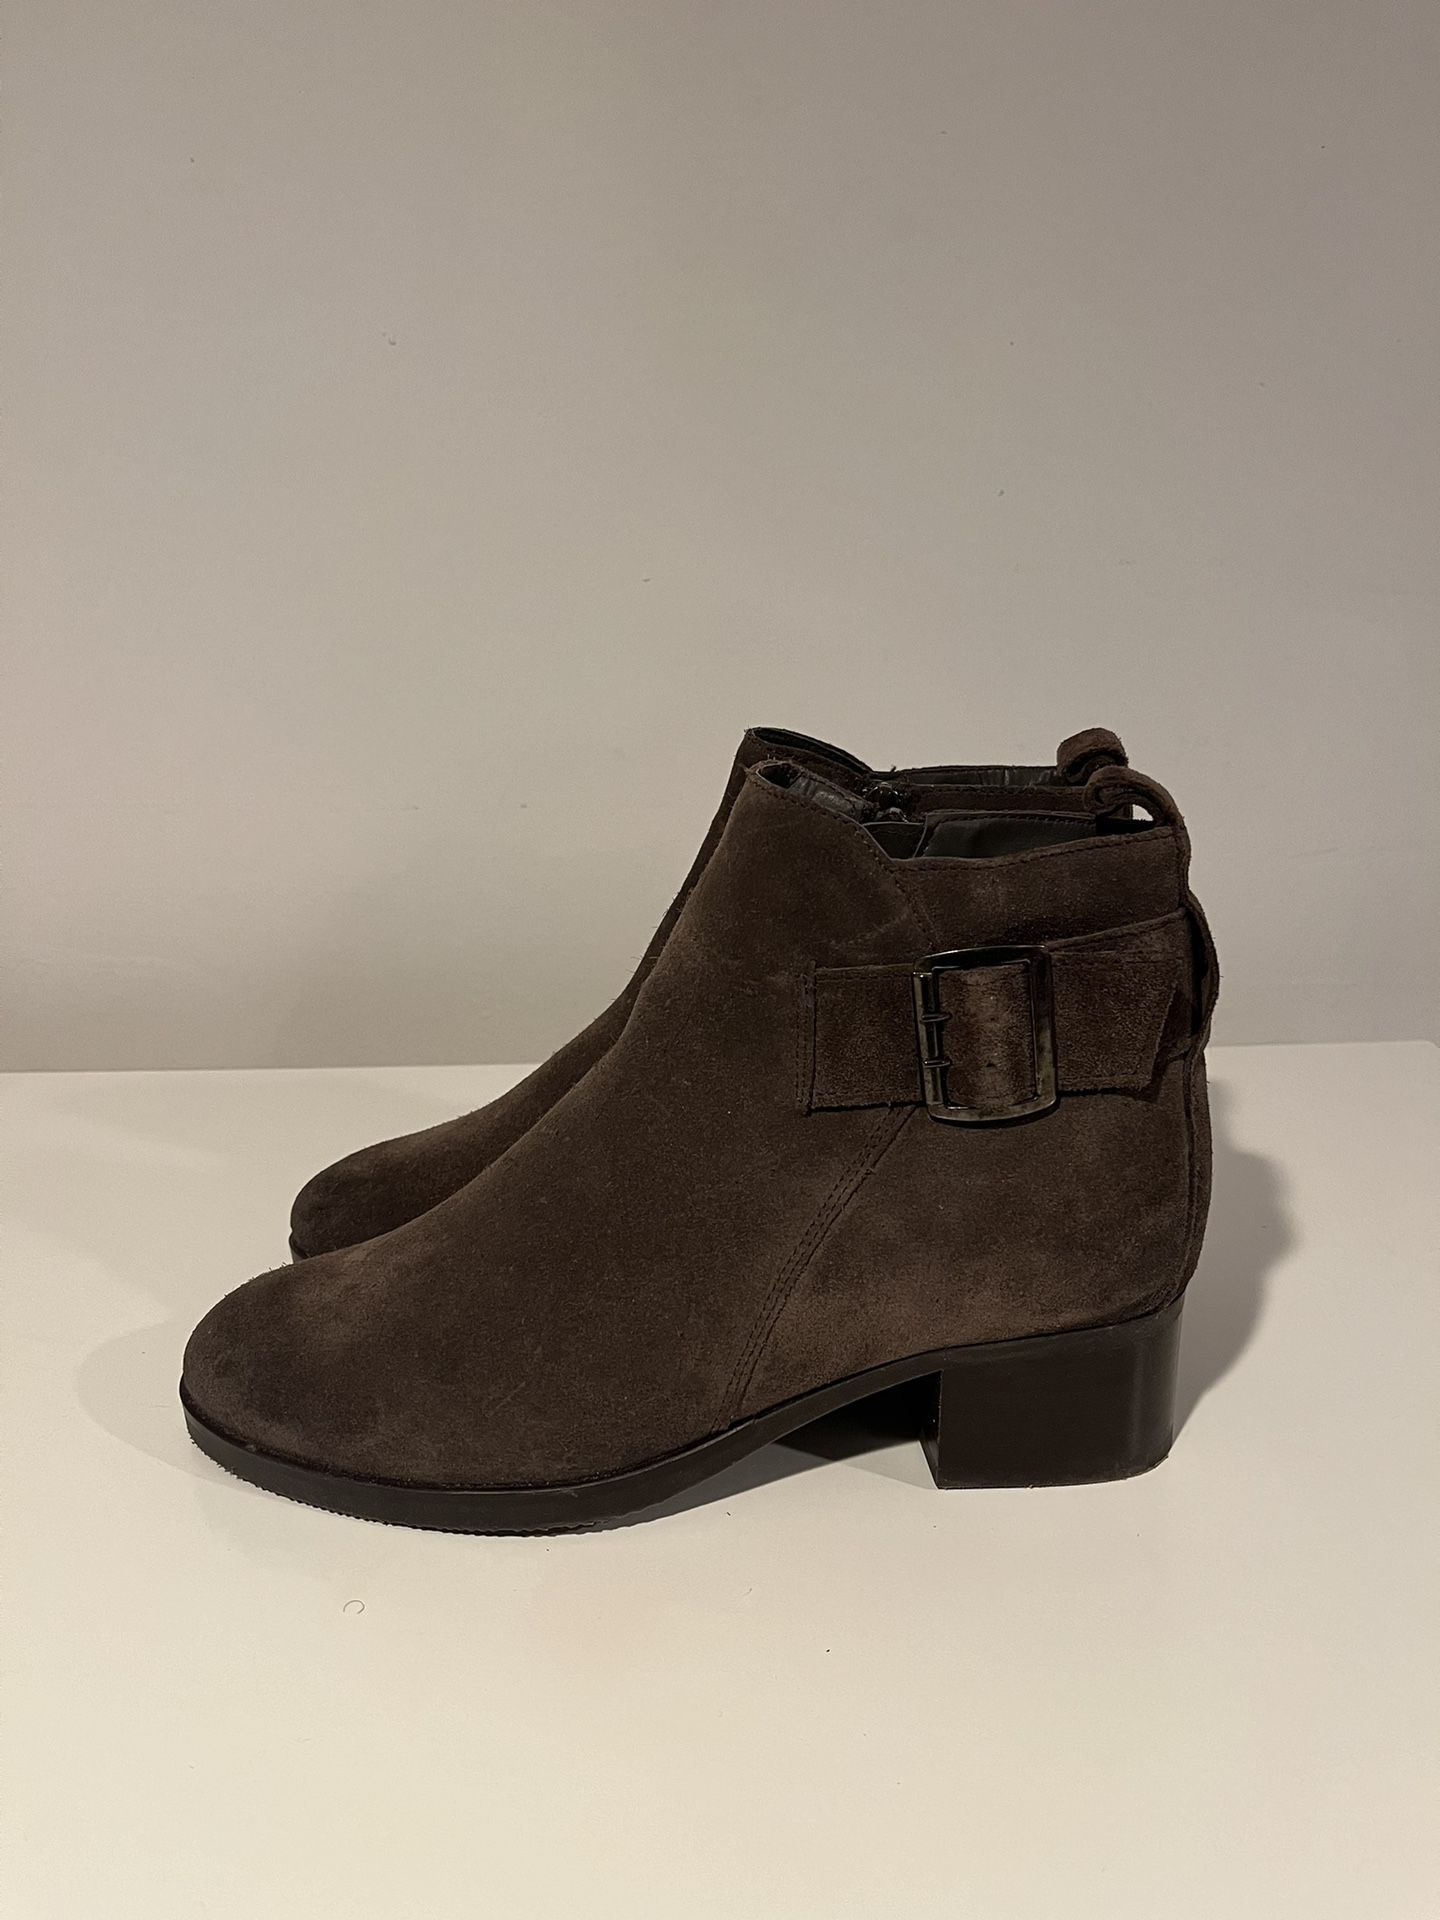 Women’s Brown Suede Clark’s Ankle Boots